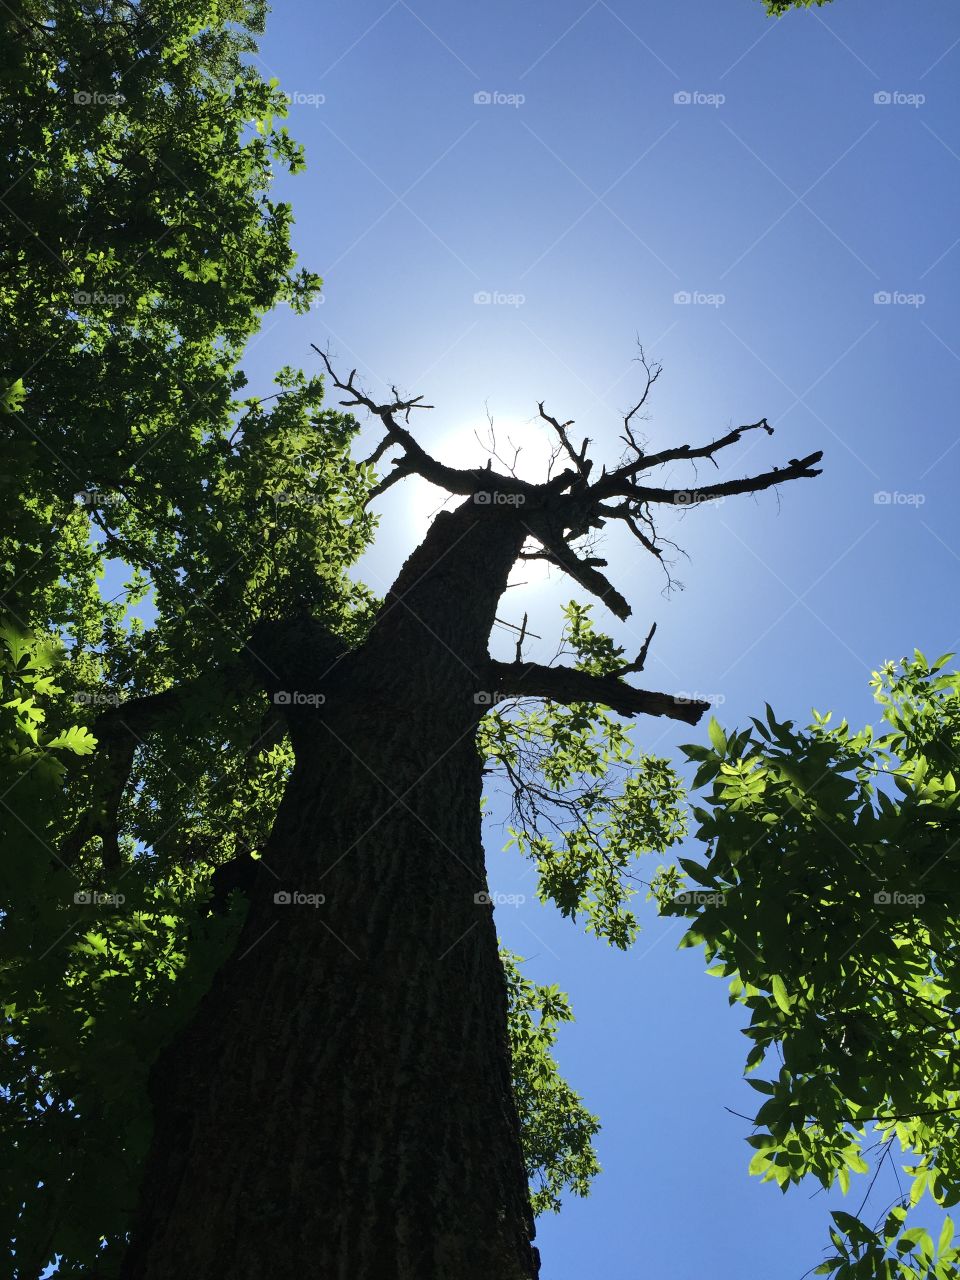 A large old tree holding blocking the sun. 